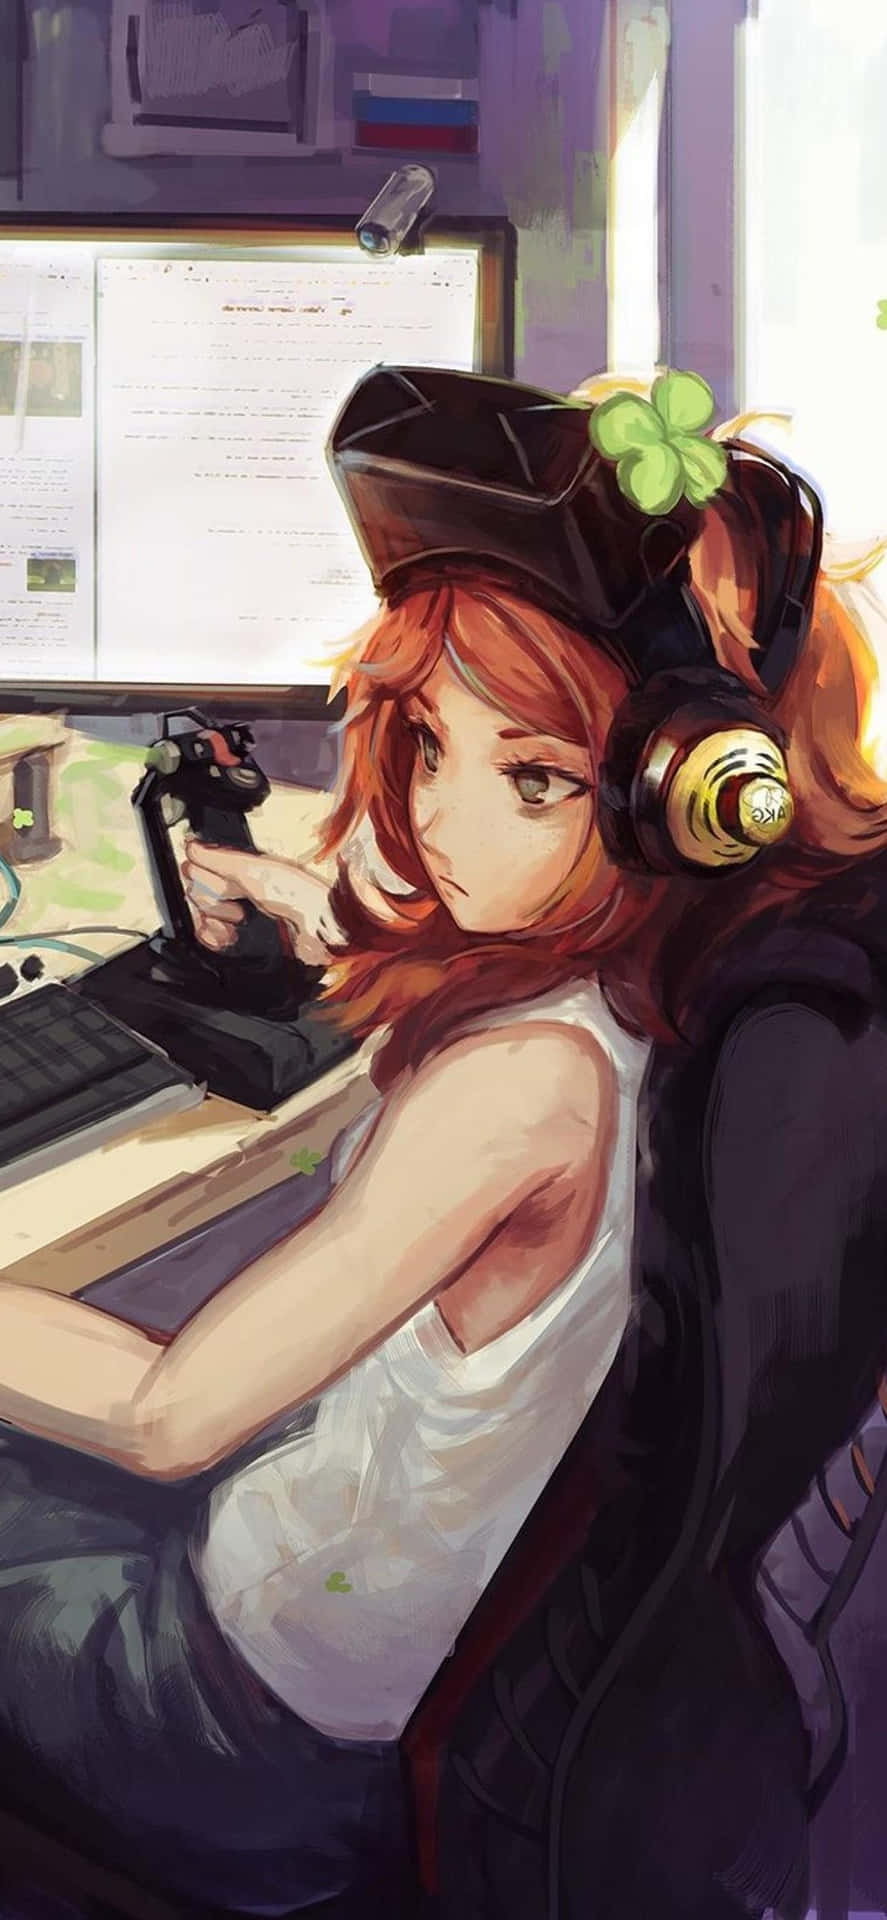 A Kawaii Gaming Girl Gets Ready To Take On the World Wallpaper